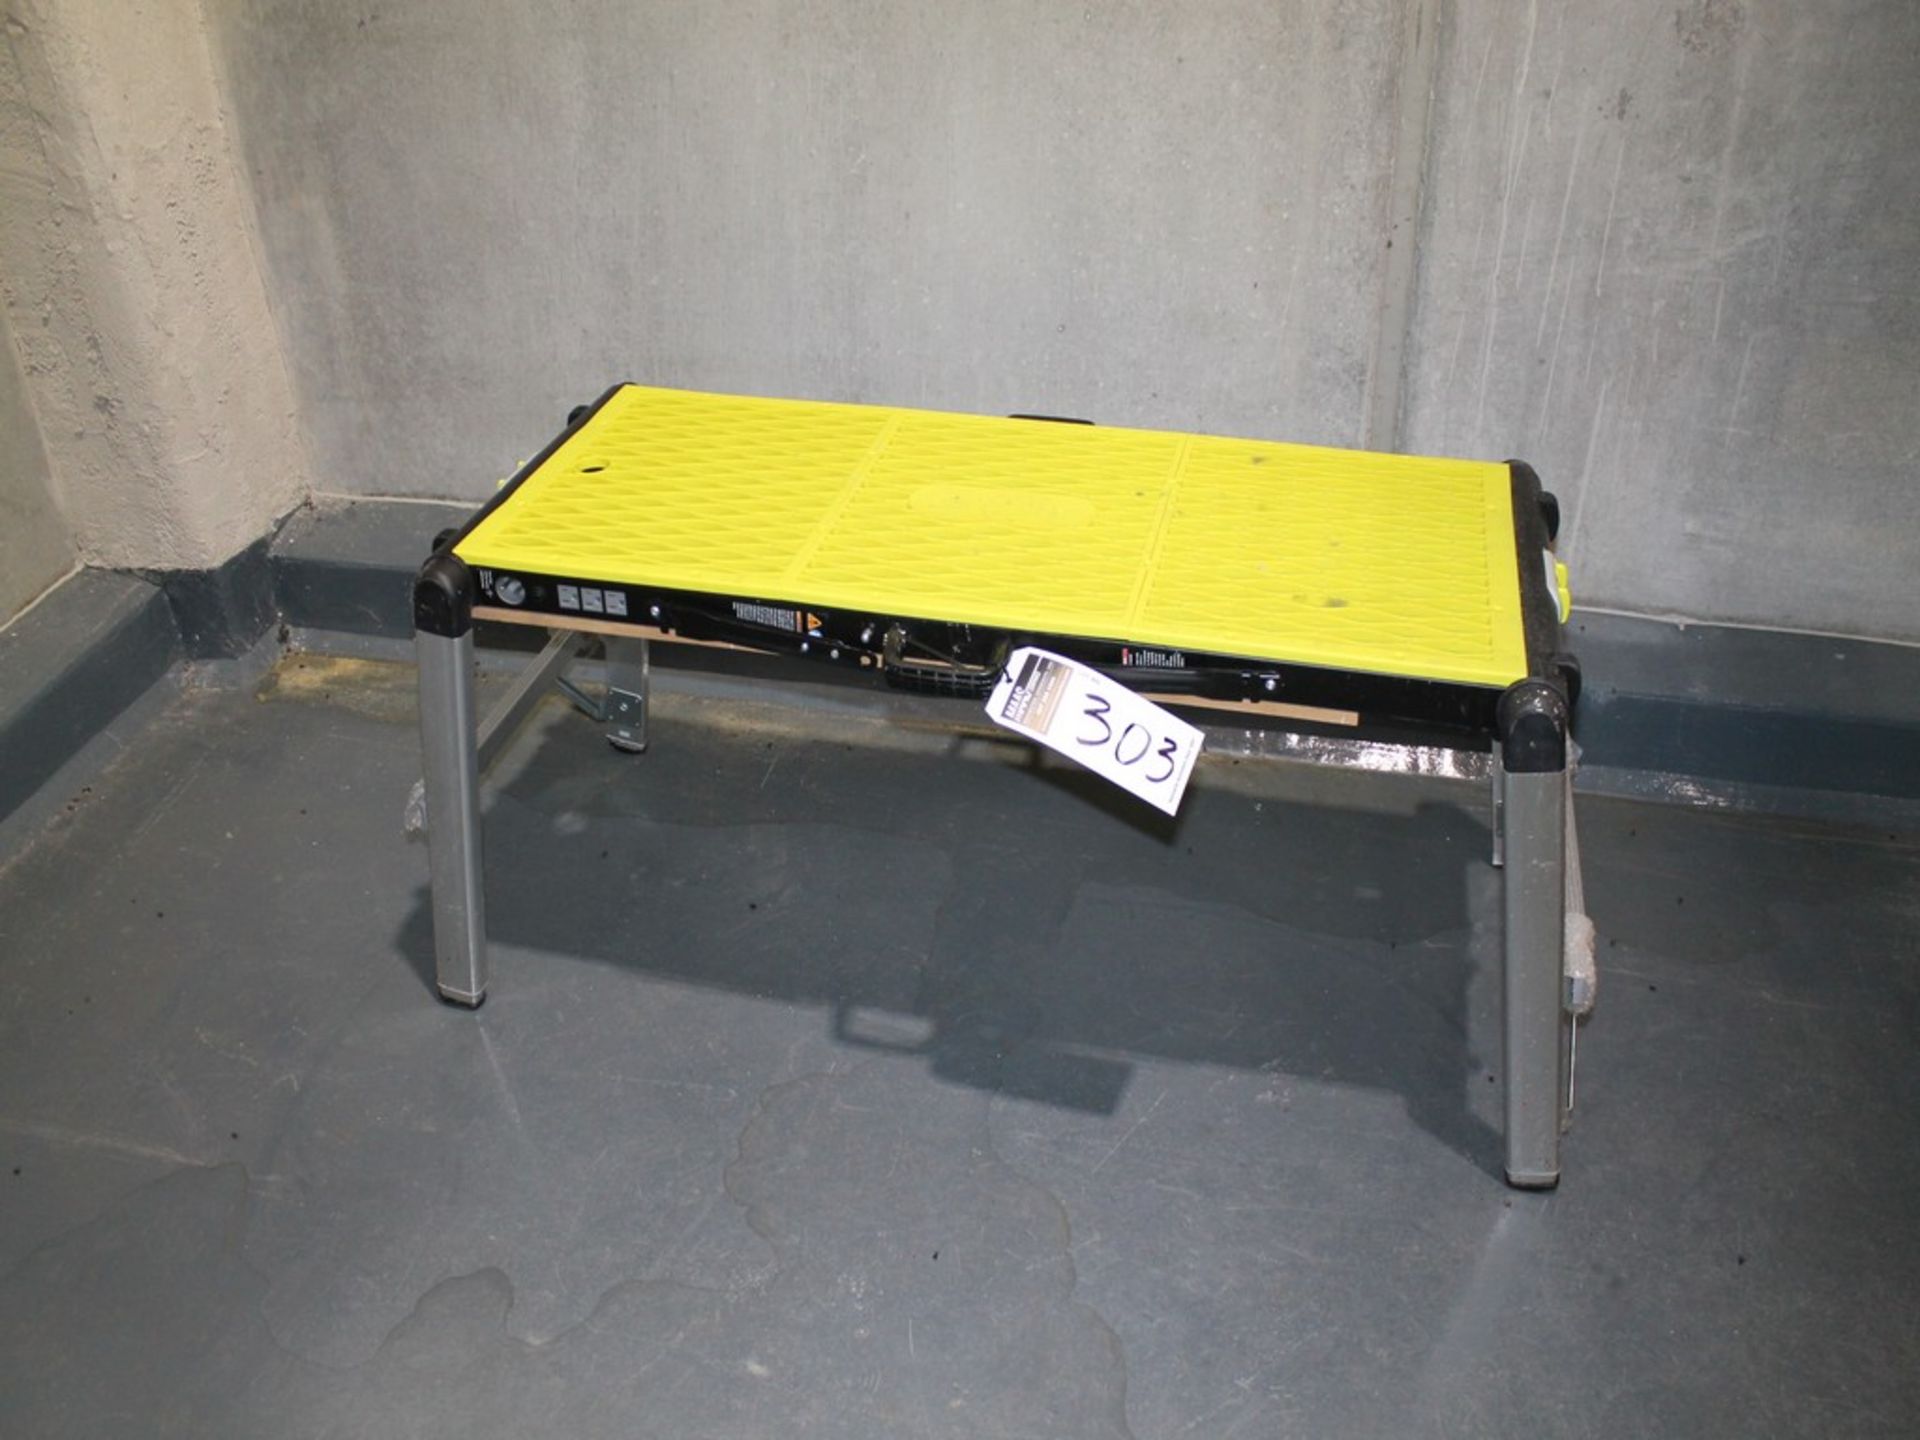 PERFORMAX WORK BENCH/SCAFFOLD